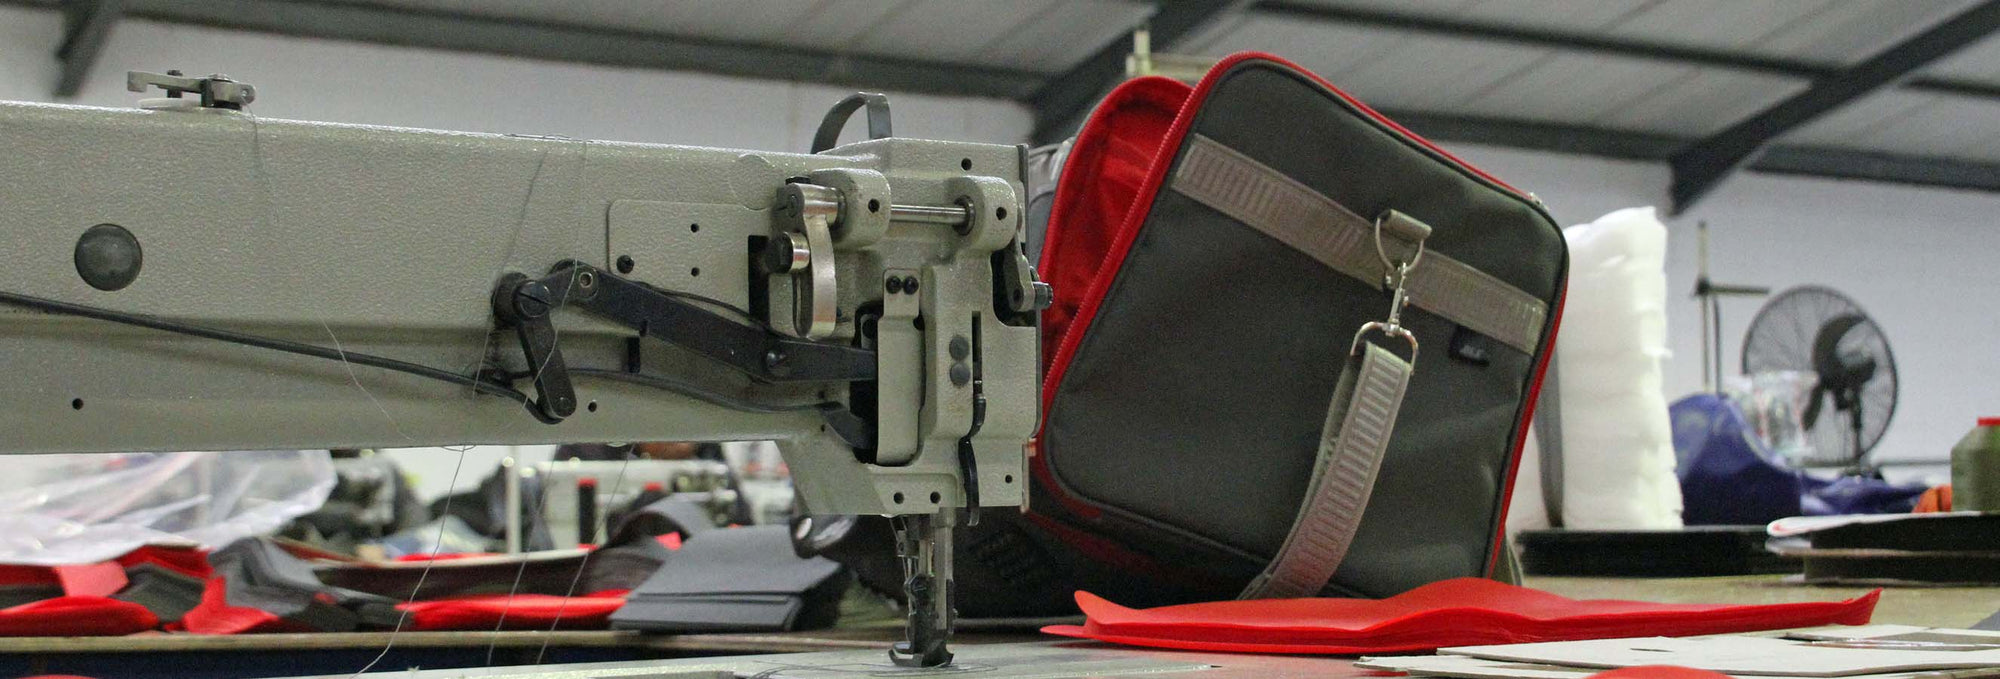 Designers and Manufacturers of Premium Cycling Bags